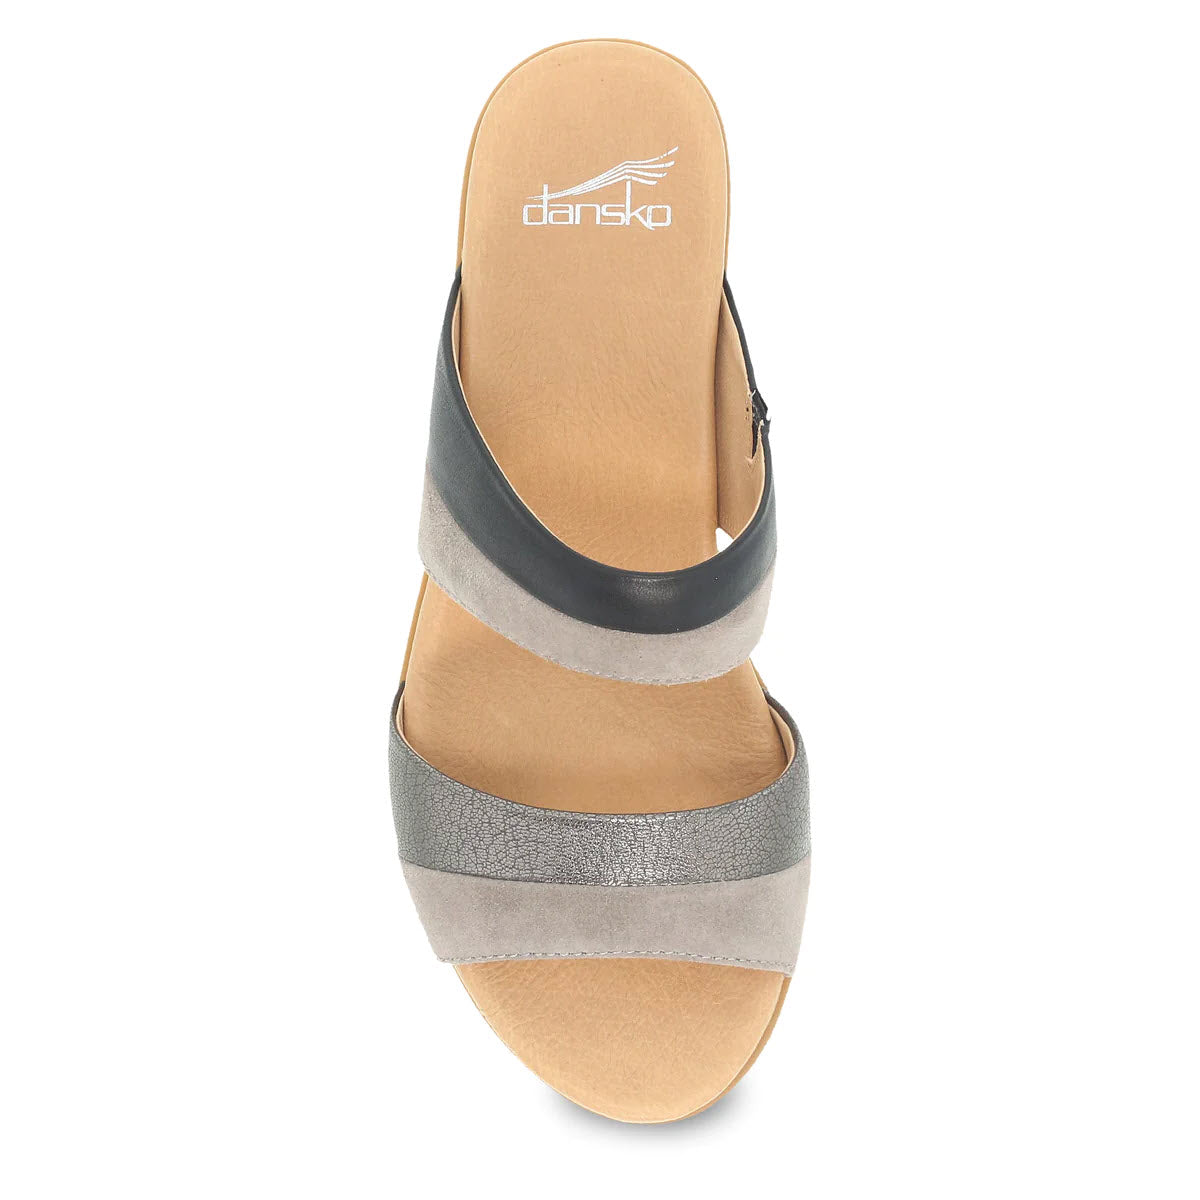 Top view of a Dansko Thersea sandal with two crossed straps in elegant colors of black and metallic gray, set against a plain white background.